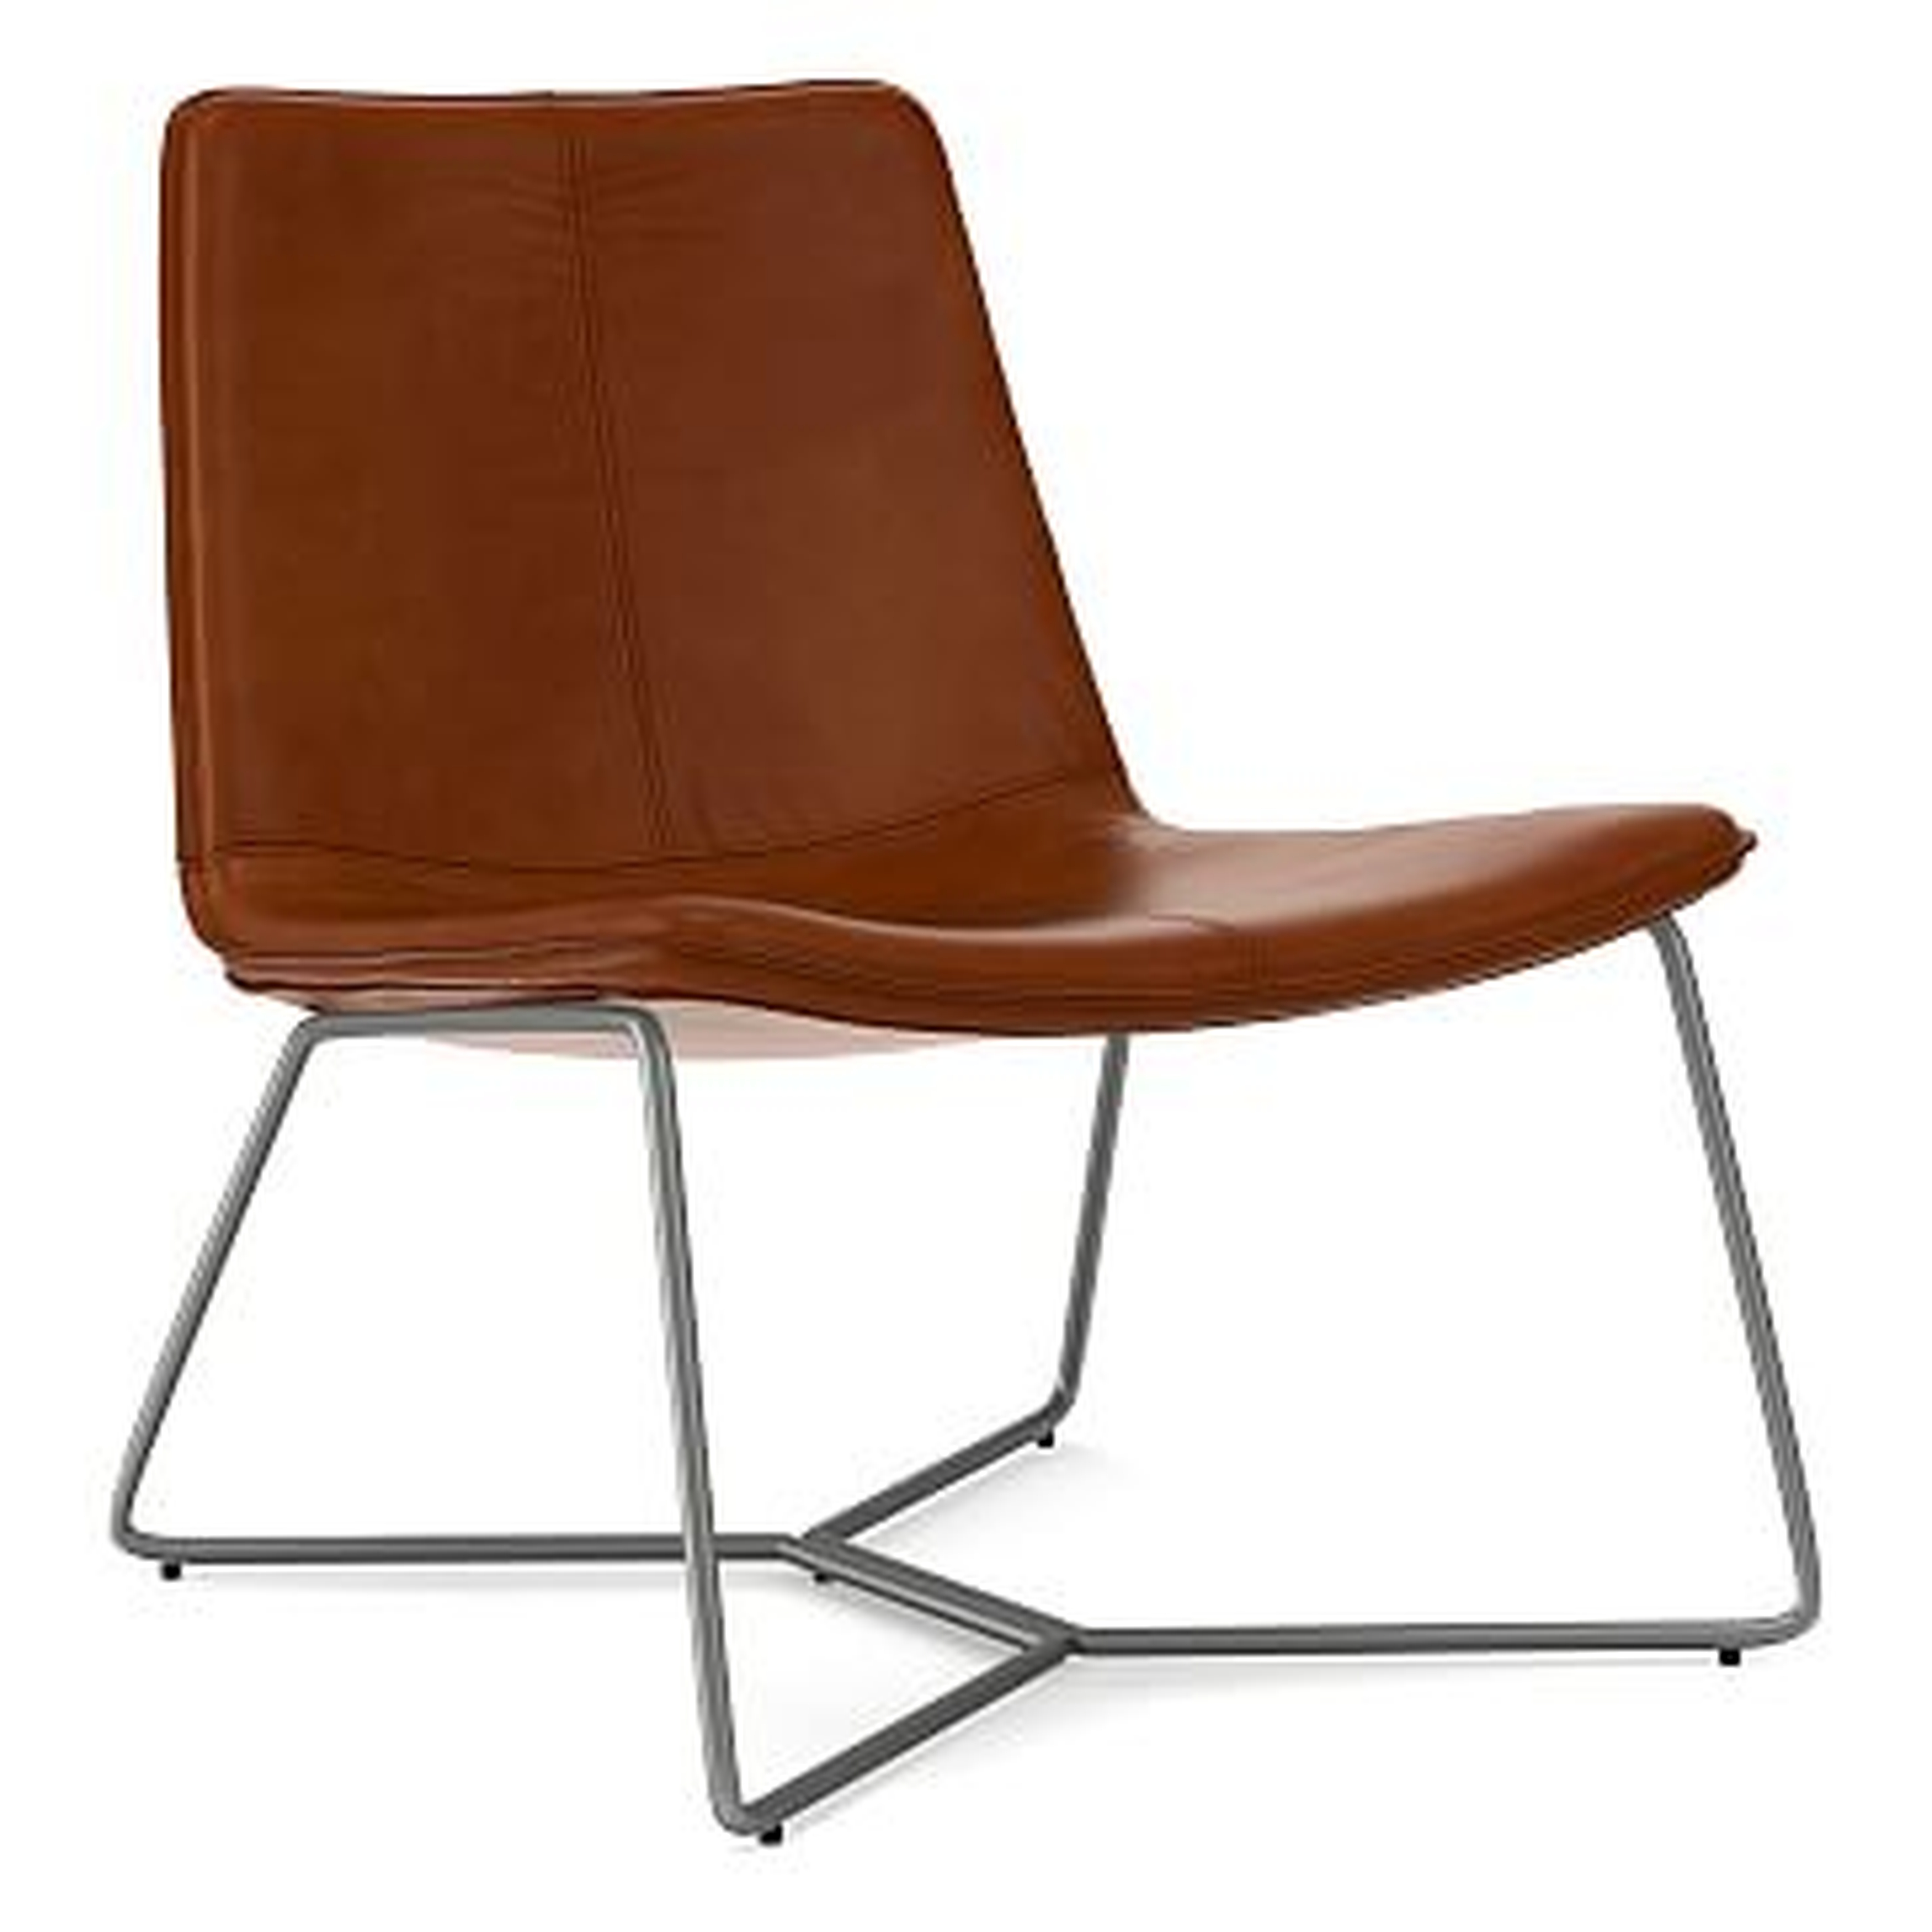 Slope Lounge Chair, Poly, Vegan Leather, Saddle, Charcoal - West Elm